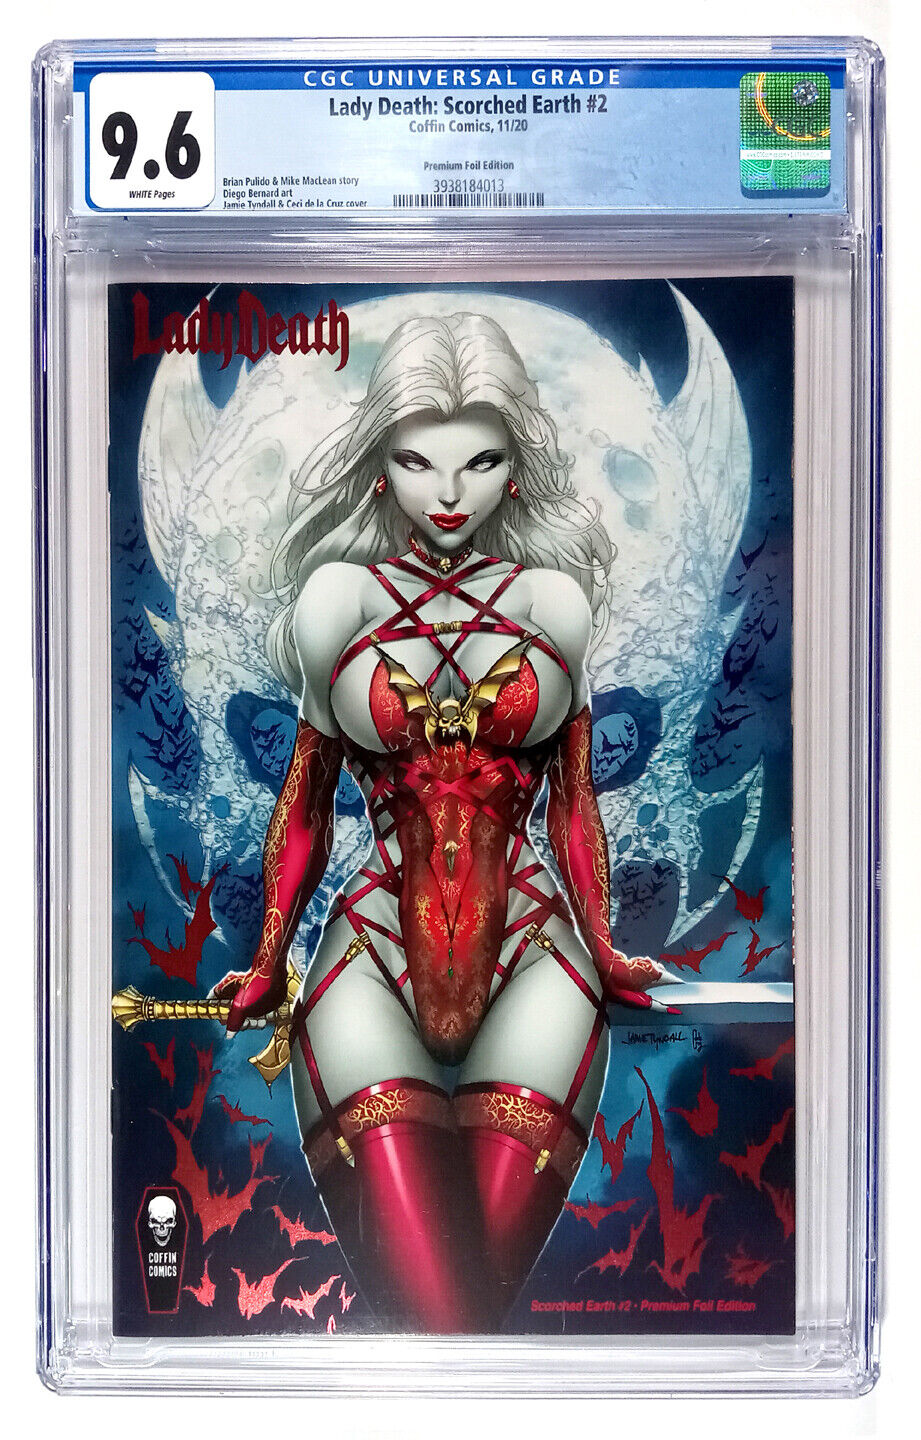 Lady Death Scorched Earth #2 CGC 9.6 Foil Edition White Pages (2020) Coffin